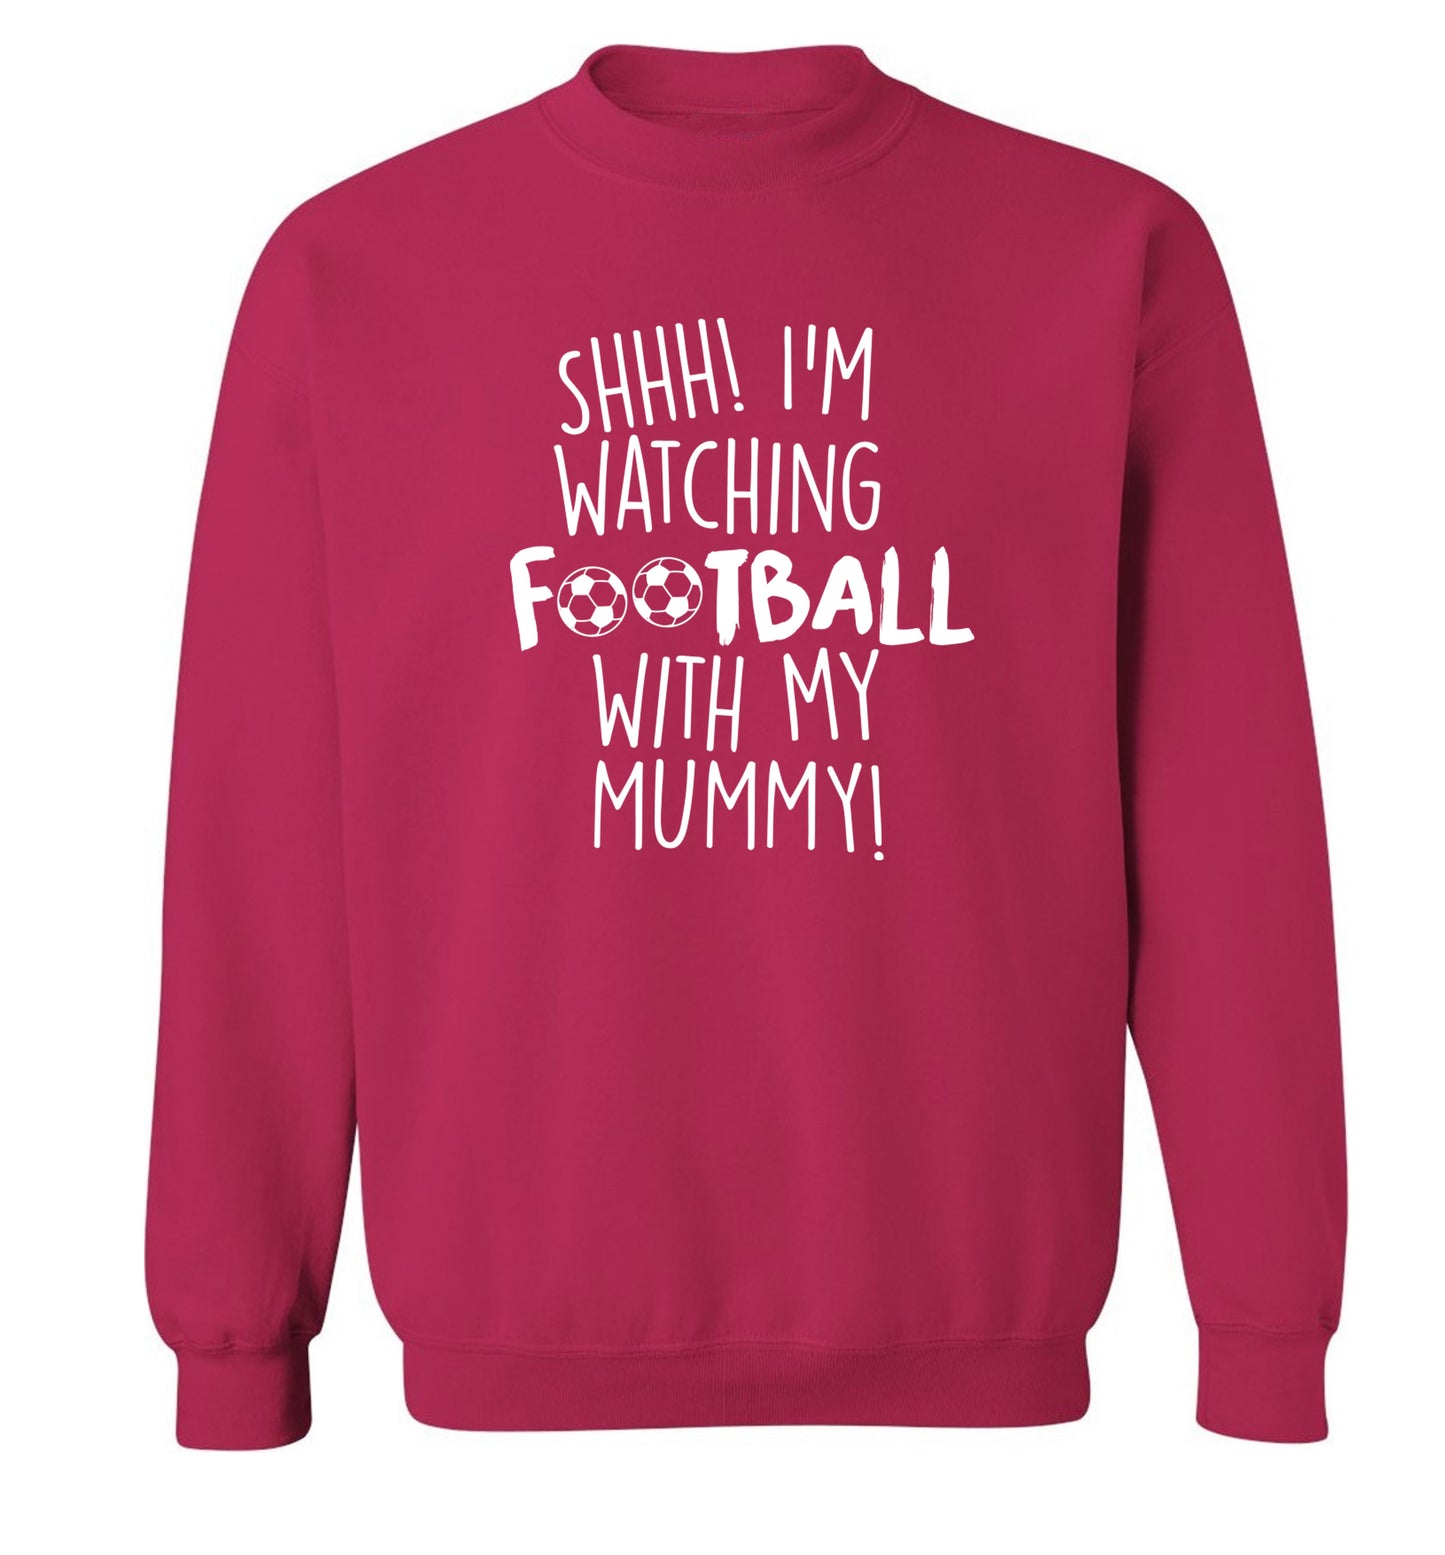 Shhh I'm watching football with my mummy Adult's unisexpink Sweater 2XL